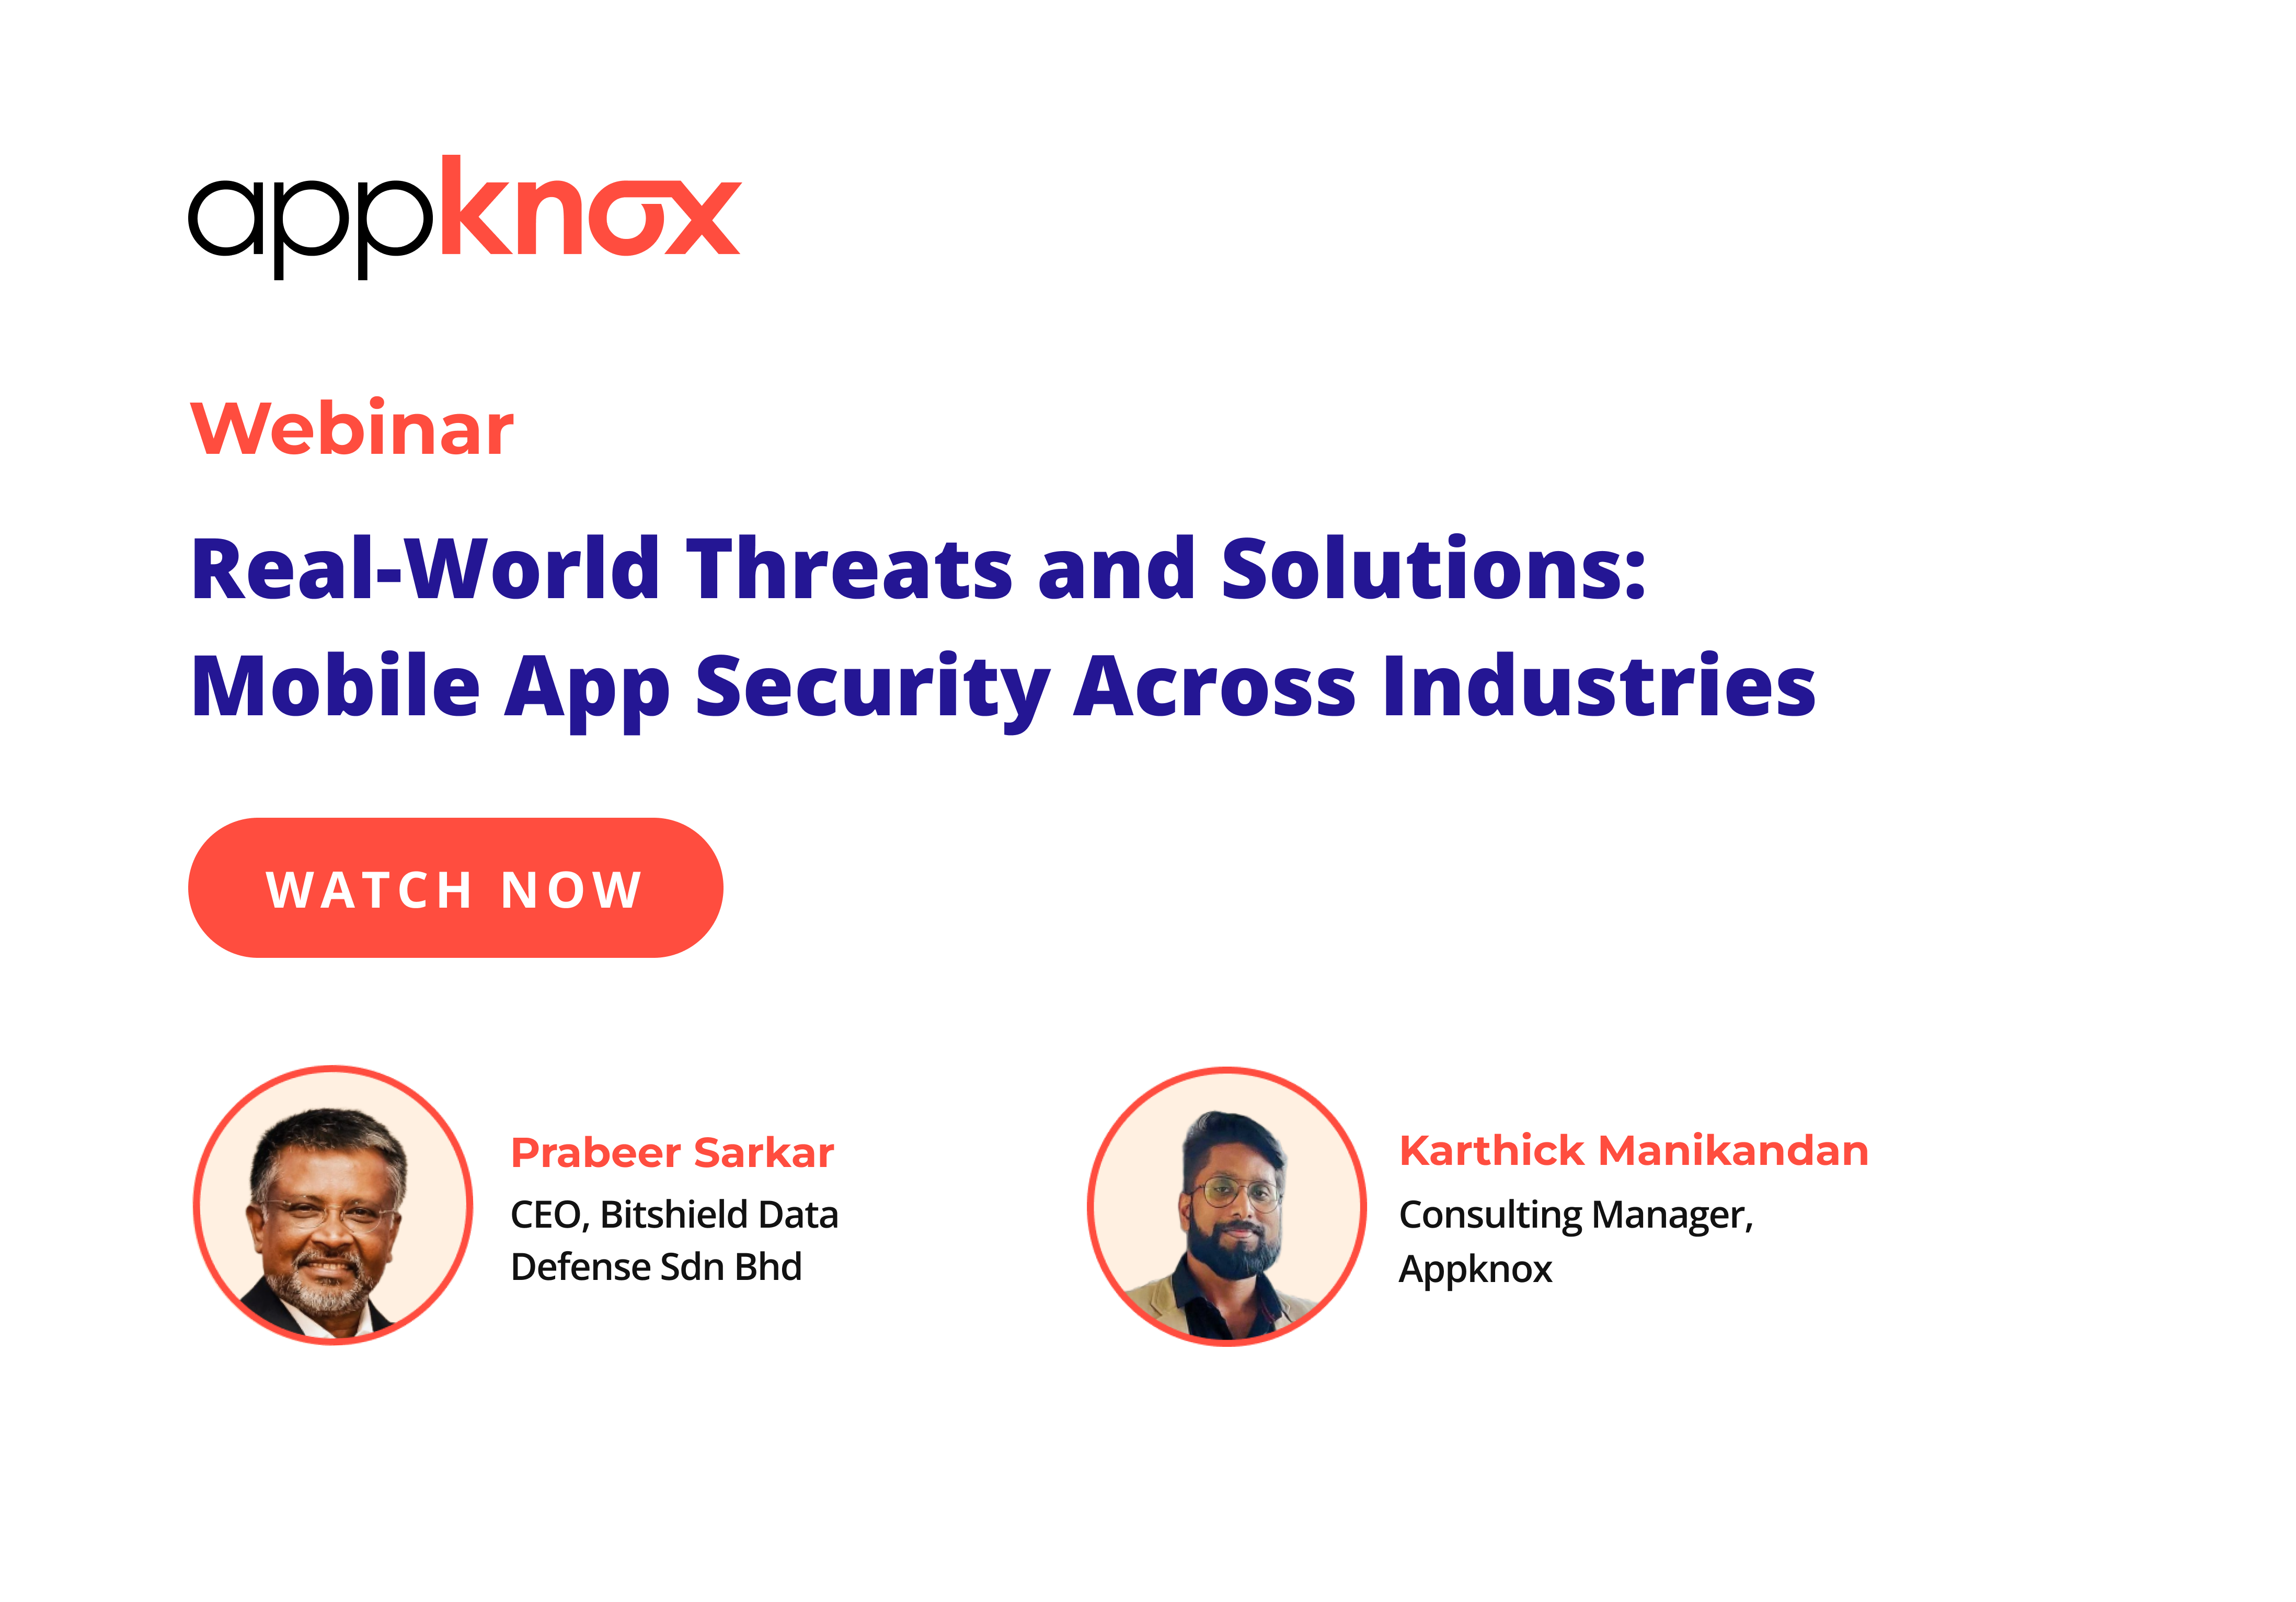 Learn about threats and solutions in mobile app security across industries. Speakers - Prabeer Sarkar, Karthick Manikandan | Appknox webinar